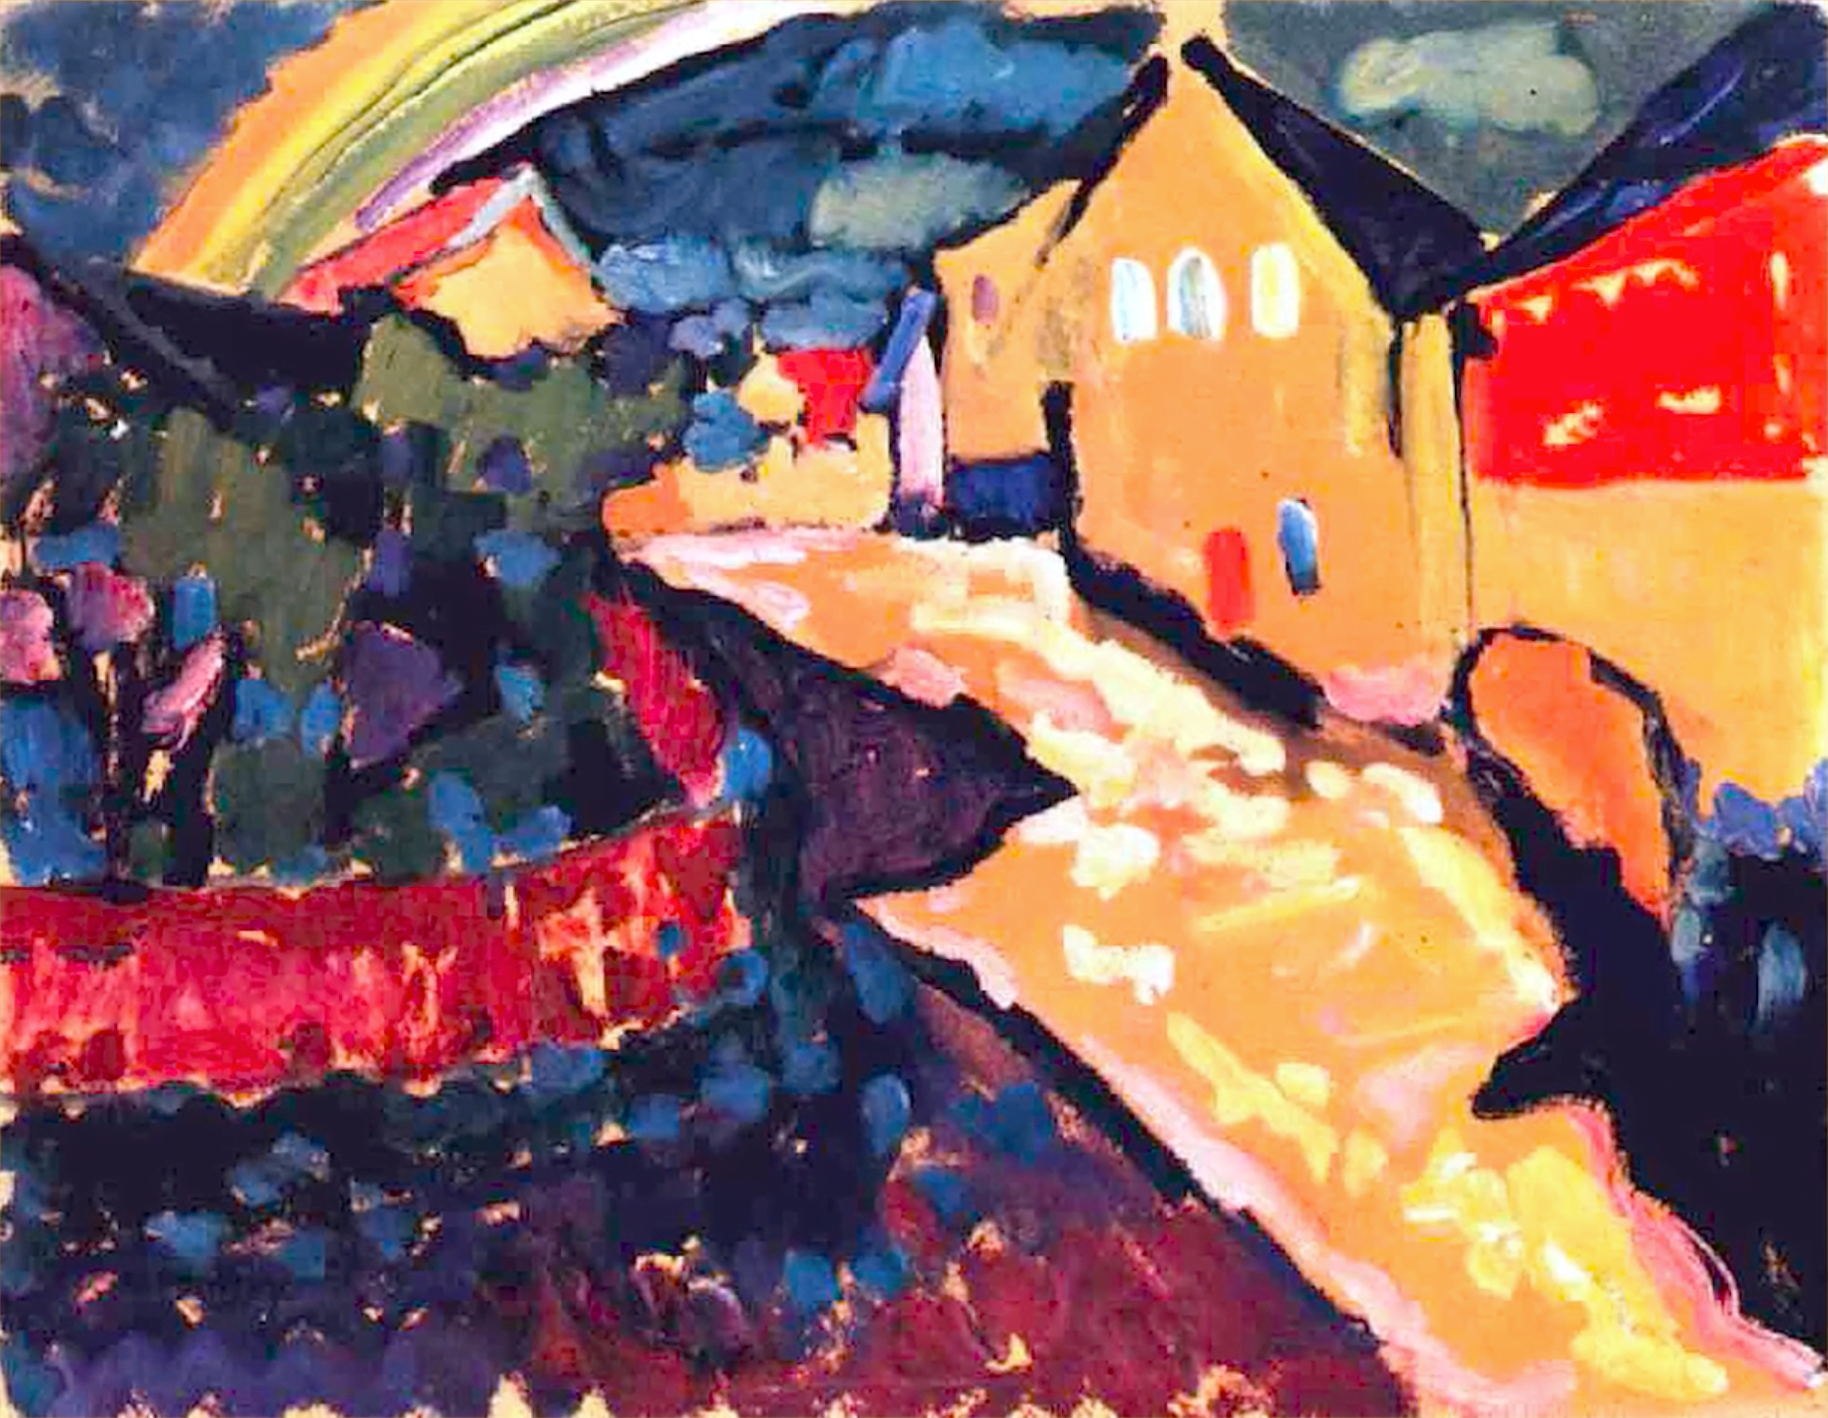 Sample of a Wassily Kandinsky abstract painting of houses along a road